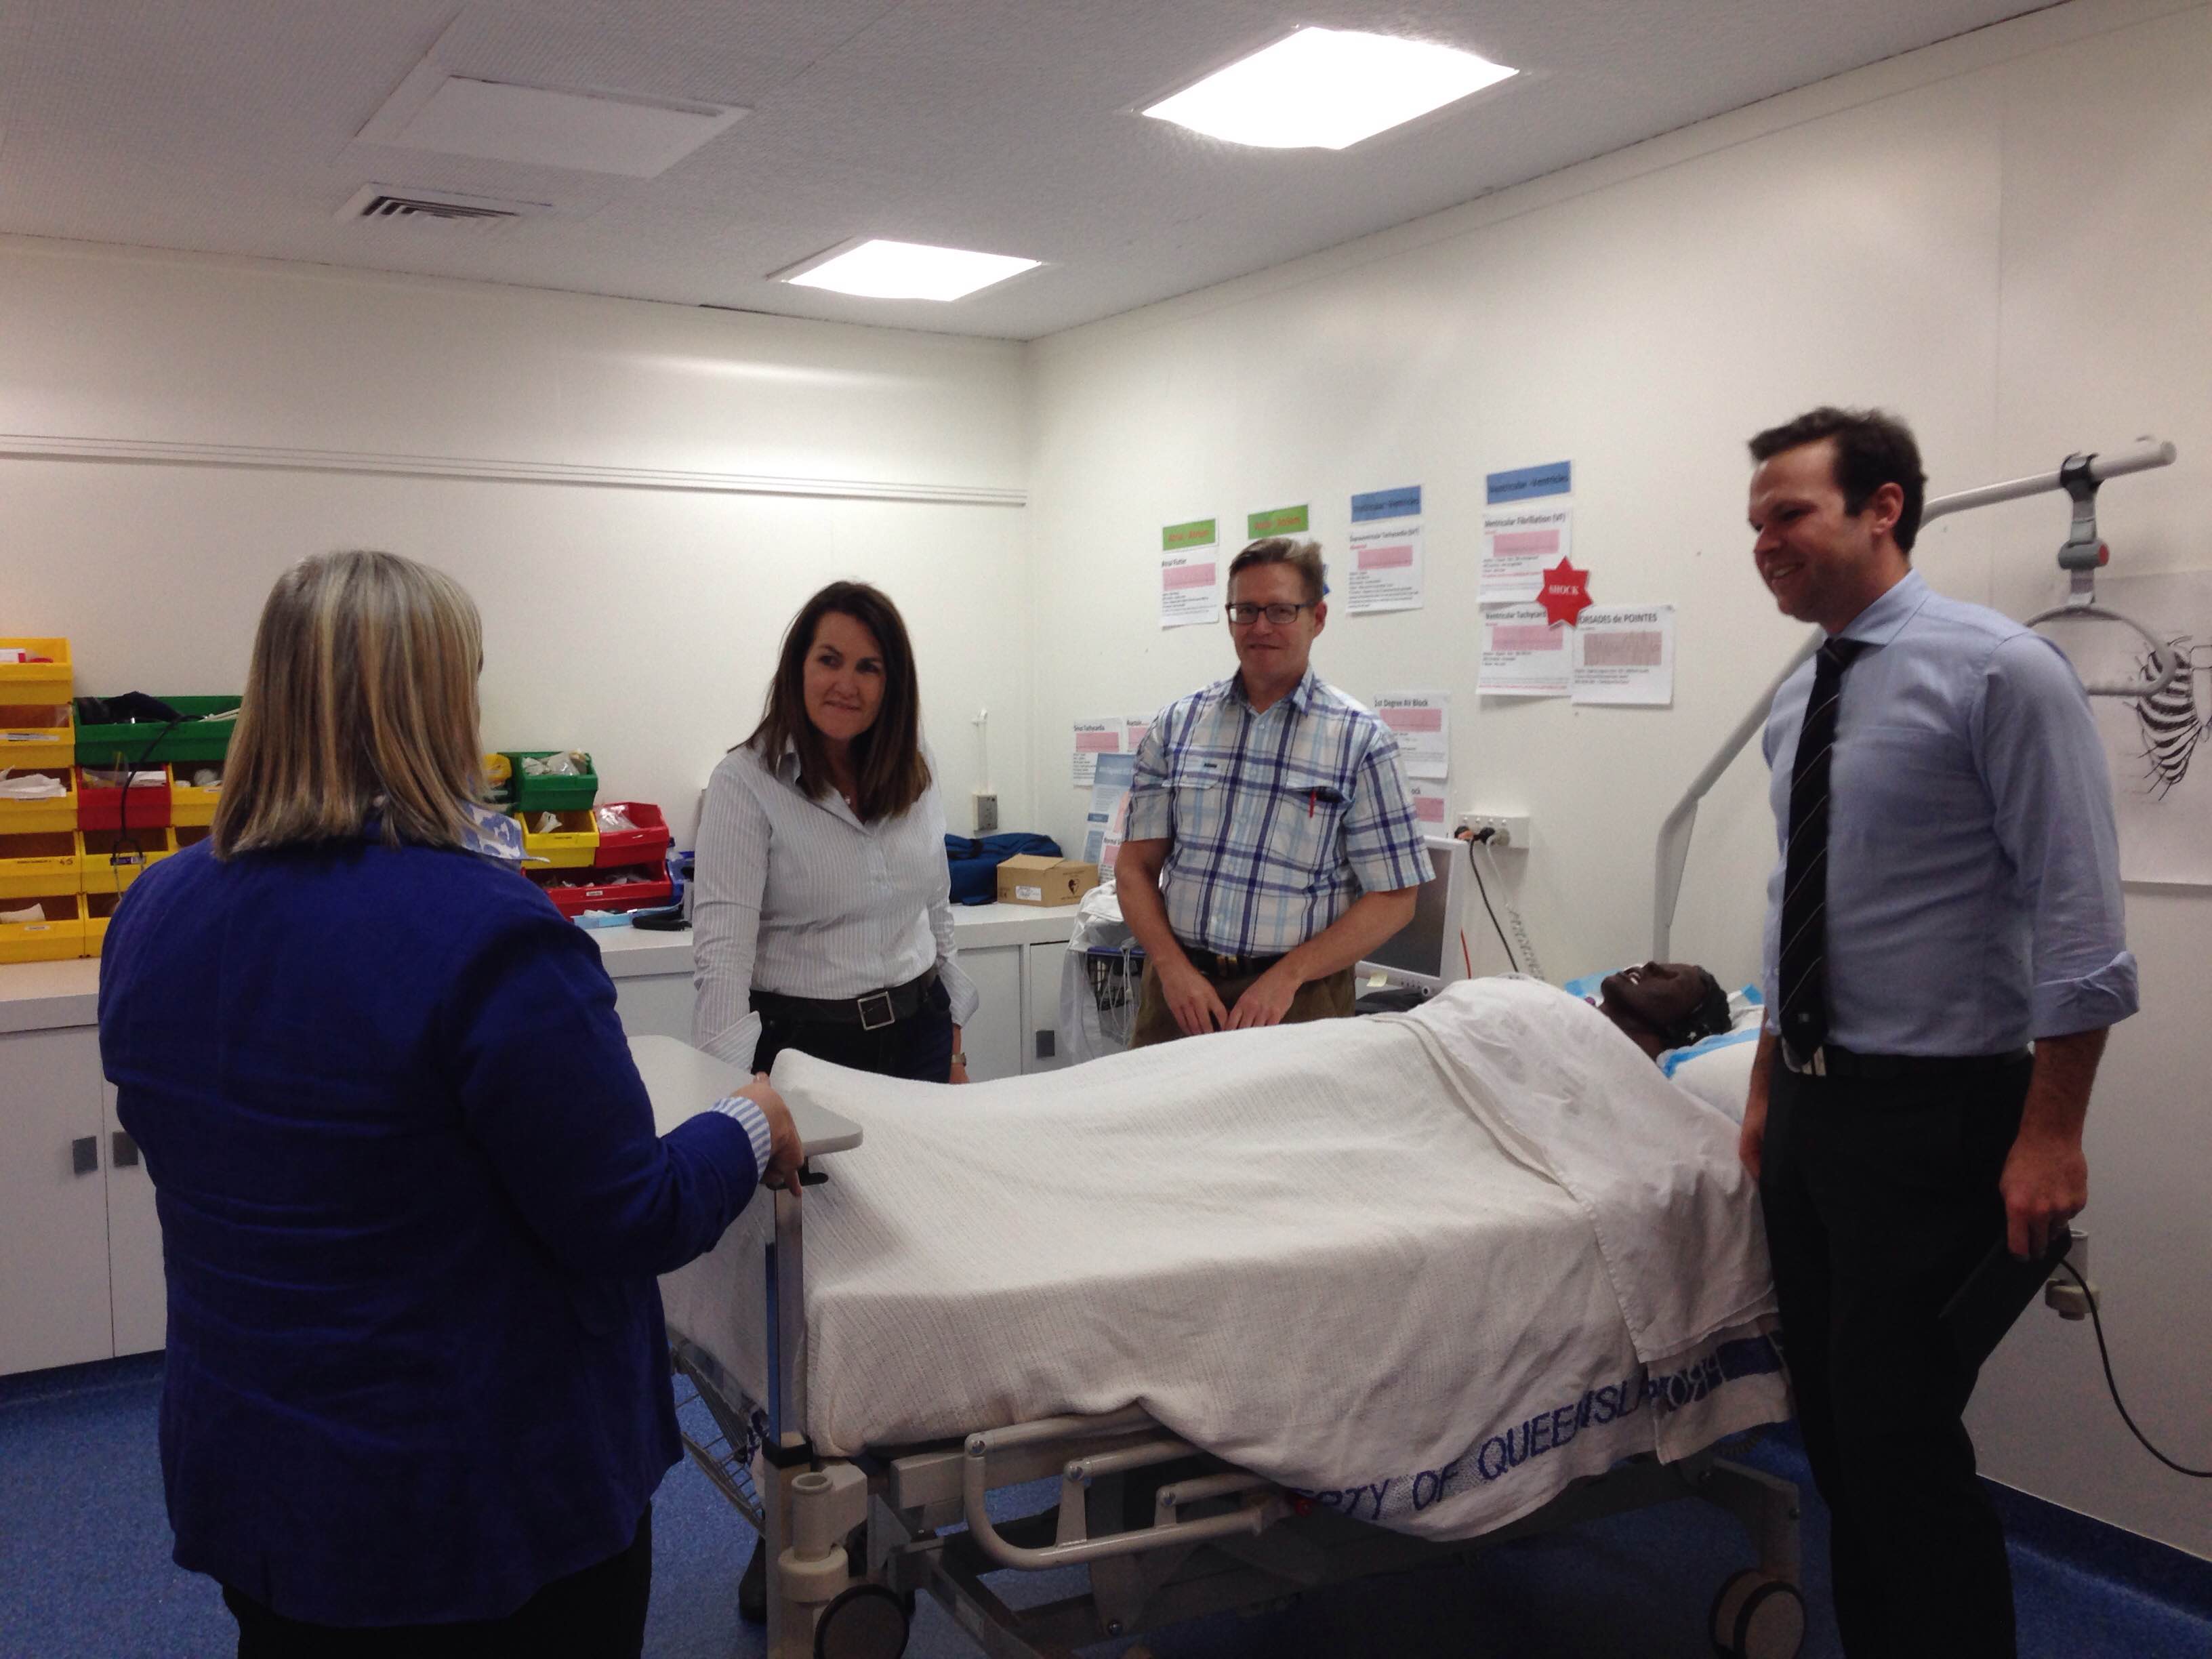 Committee members hearing about the training facilities for medical students in rural placements at Flinders Medical Centre, Cloncurry, Qld, 1 May 2015. Facing camera L-R: Senator Deborah O'Neill [Chair], Dr Bryan Connor and Senator Matt Canavan.